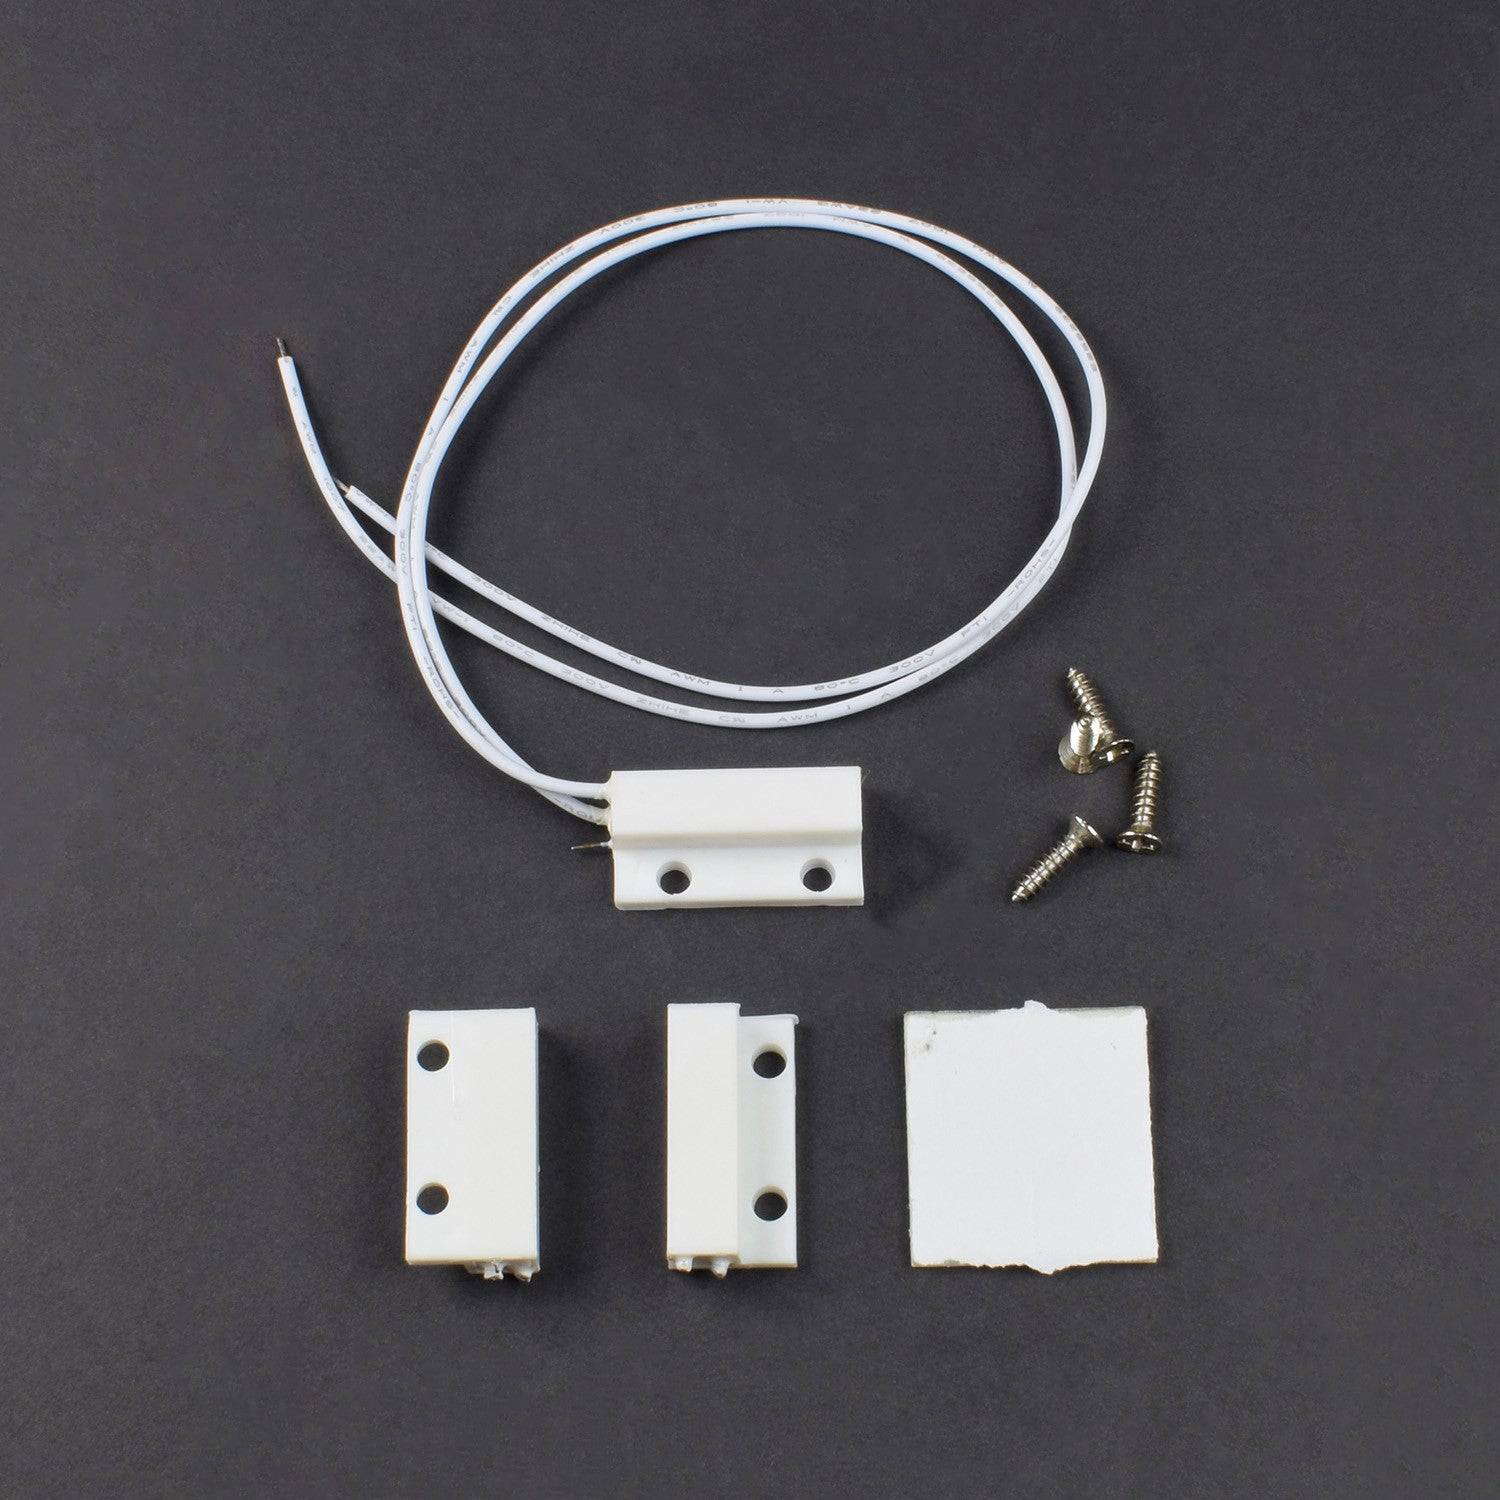 1 Pair MC-38 Wired Magnetic Alarm System Door Window Sensor Switch With Screw - NB033 - REES52